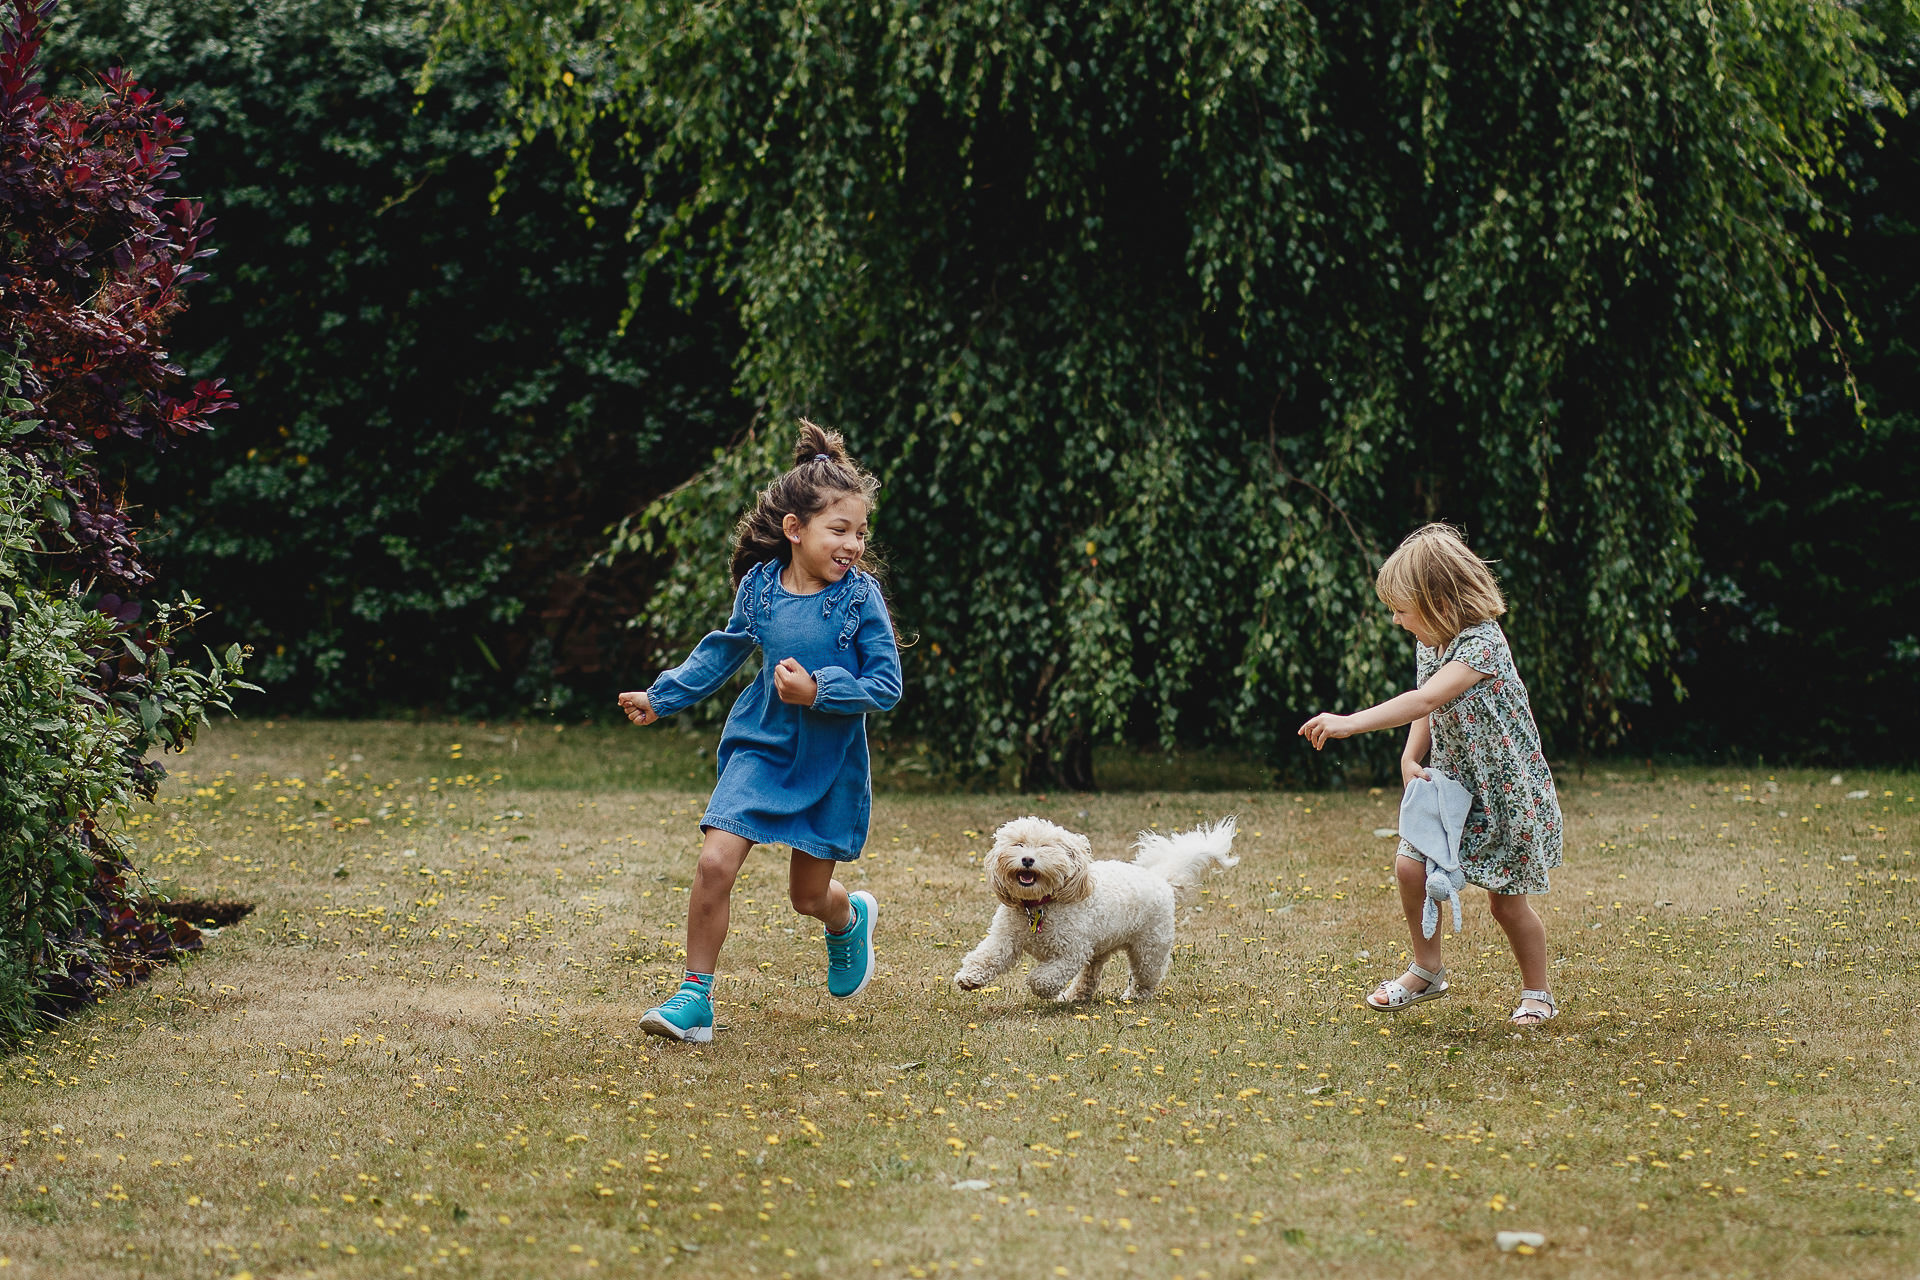 Two girls laughing and running across grass with a white dog